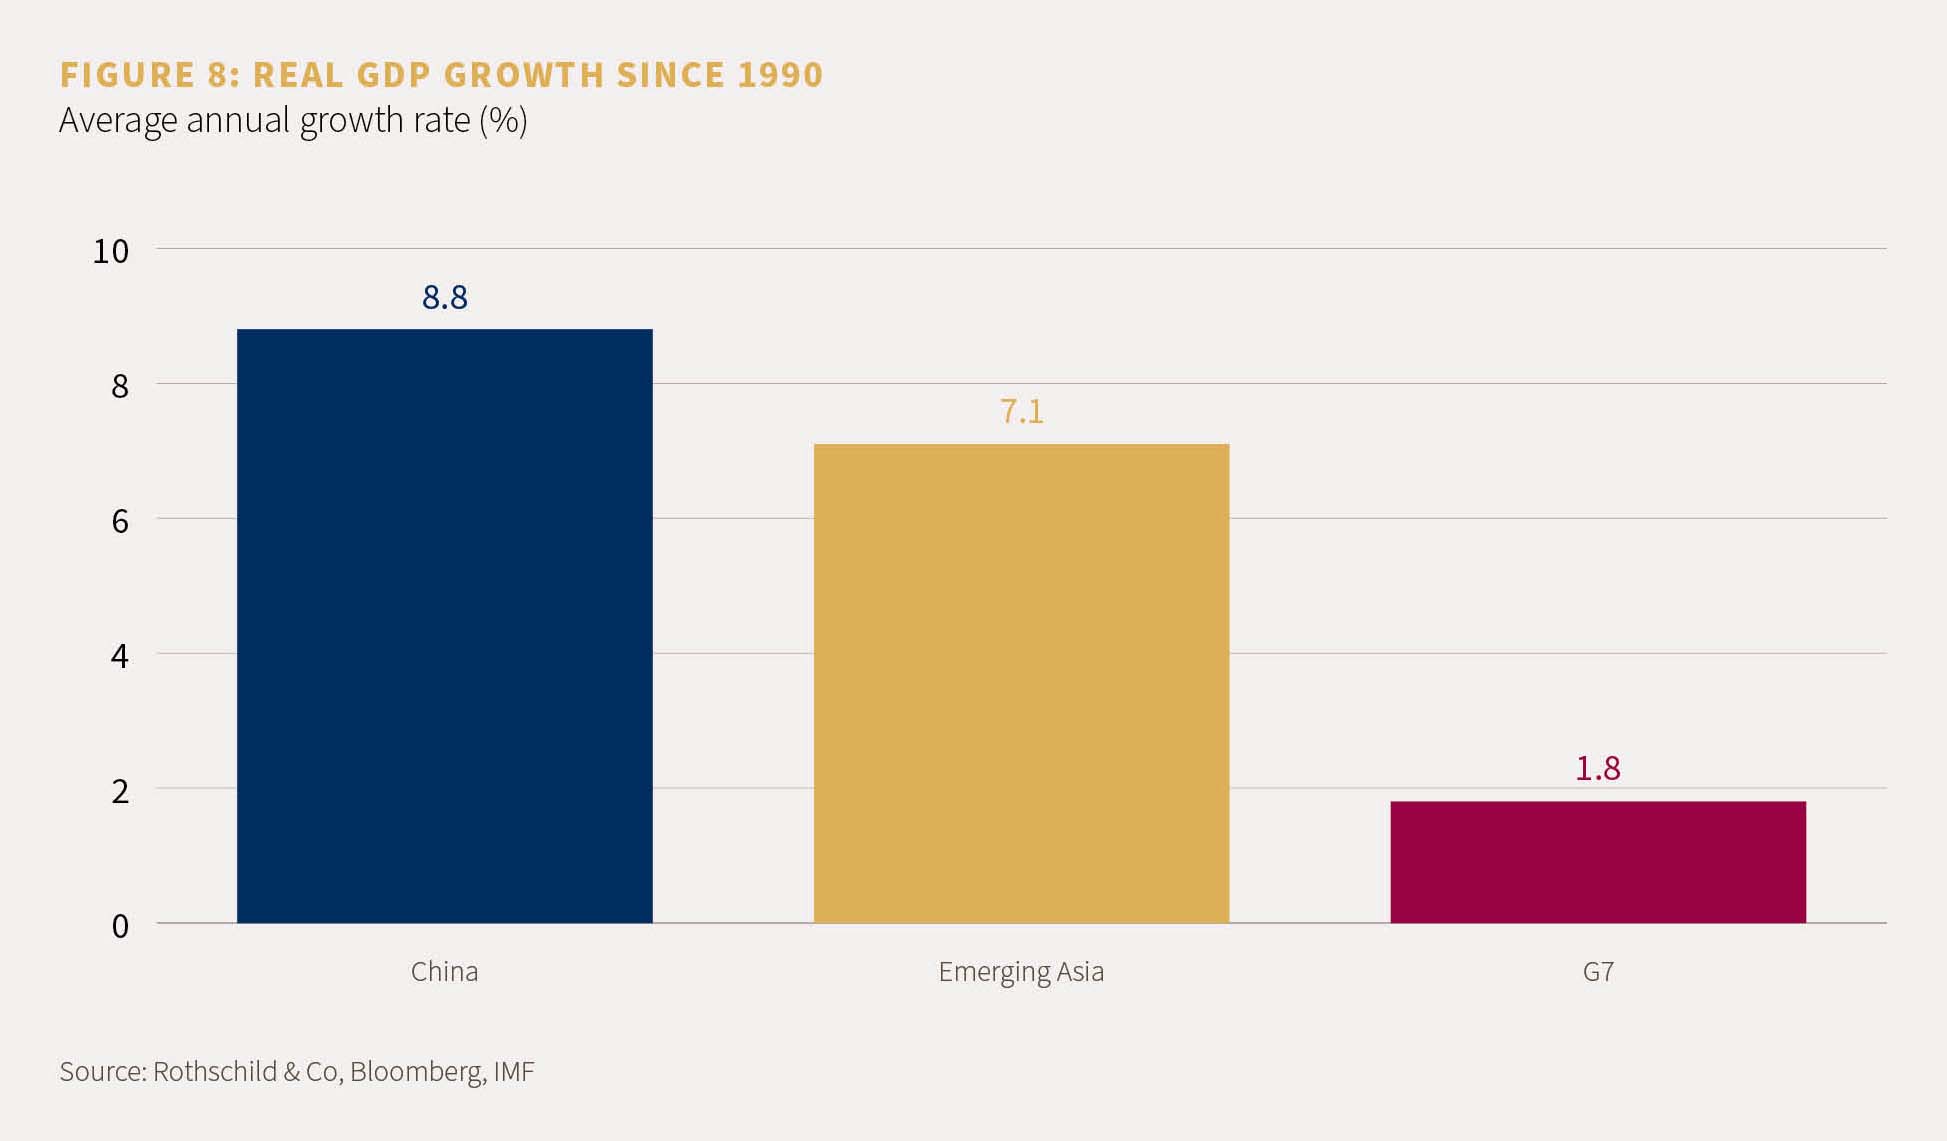 Real GDP growth. China's increasing by 8.8% since 1990.